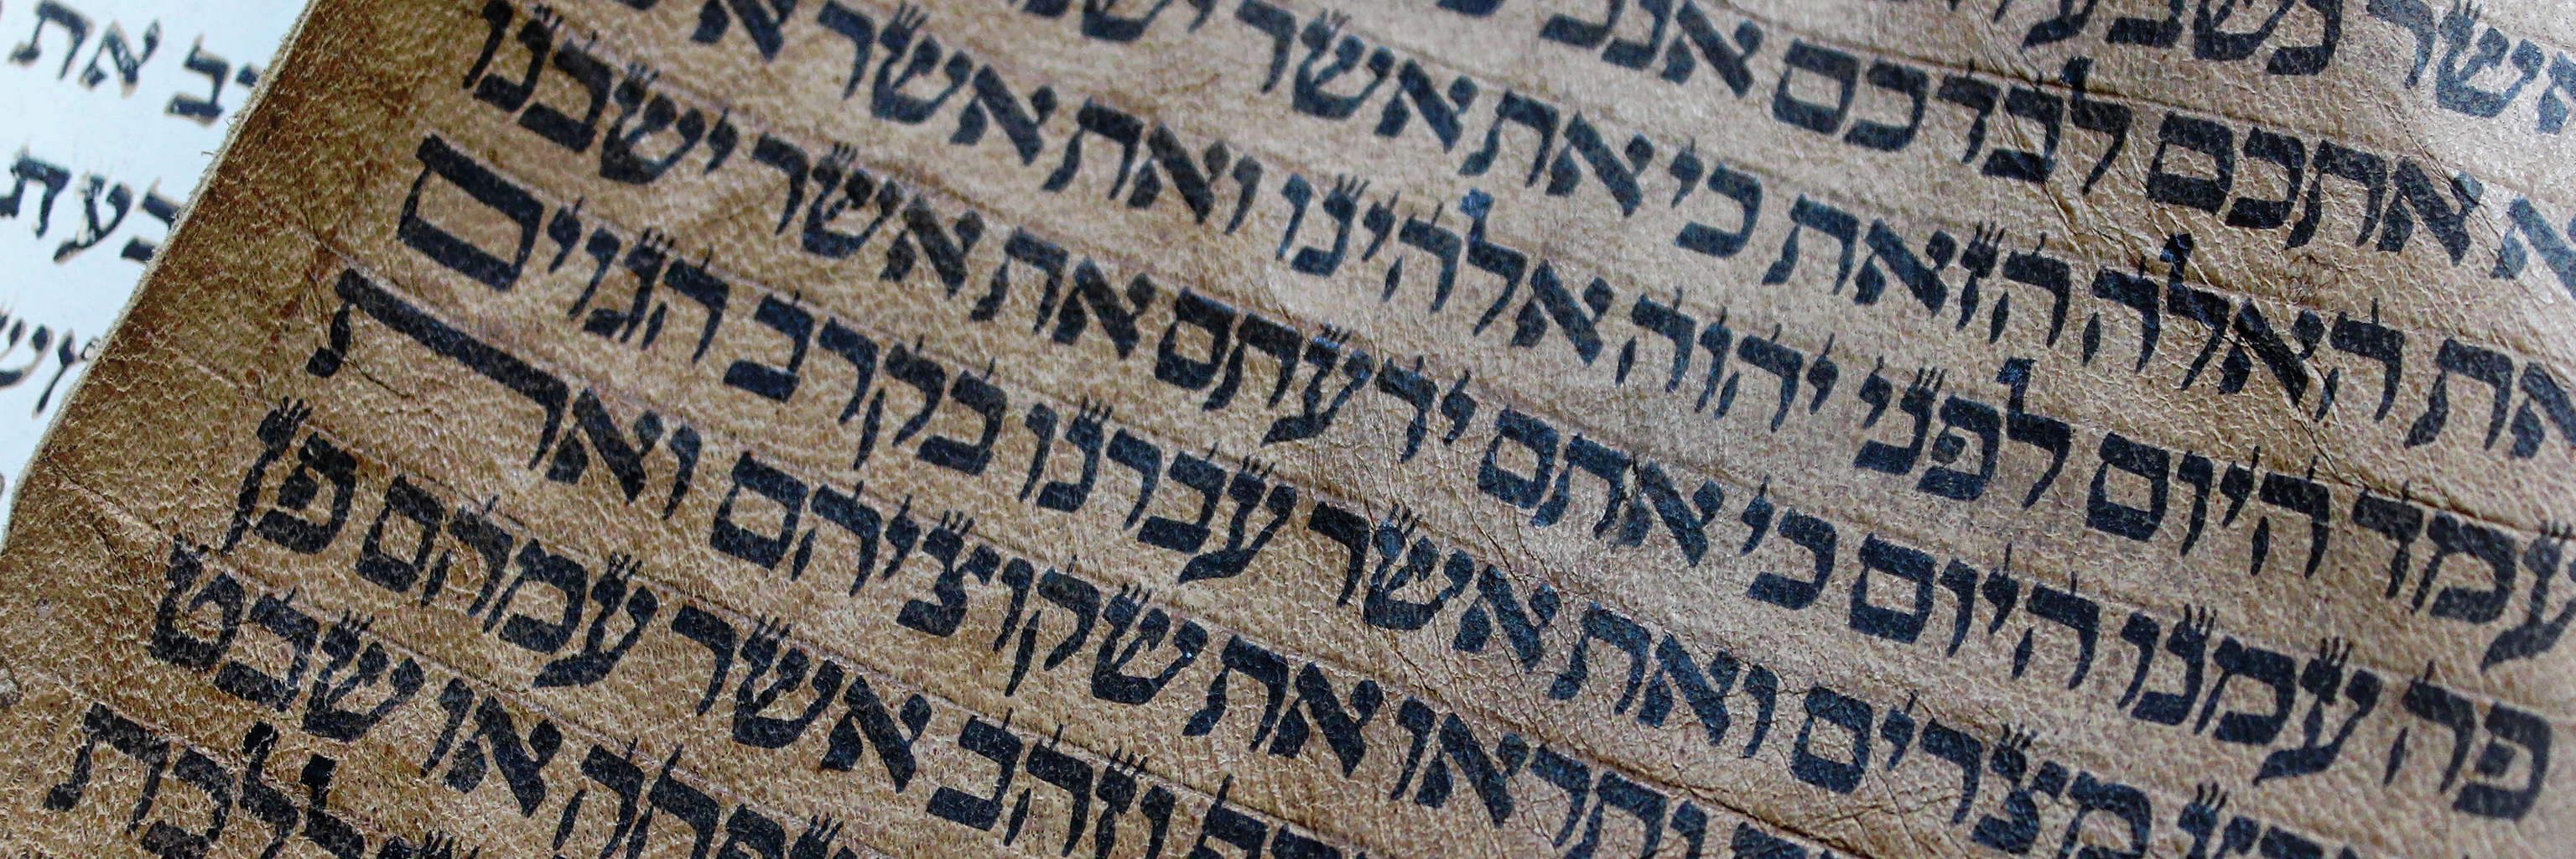 Yiddish writing from a religious text.